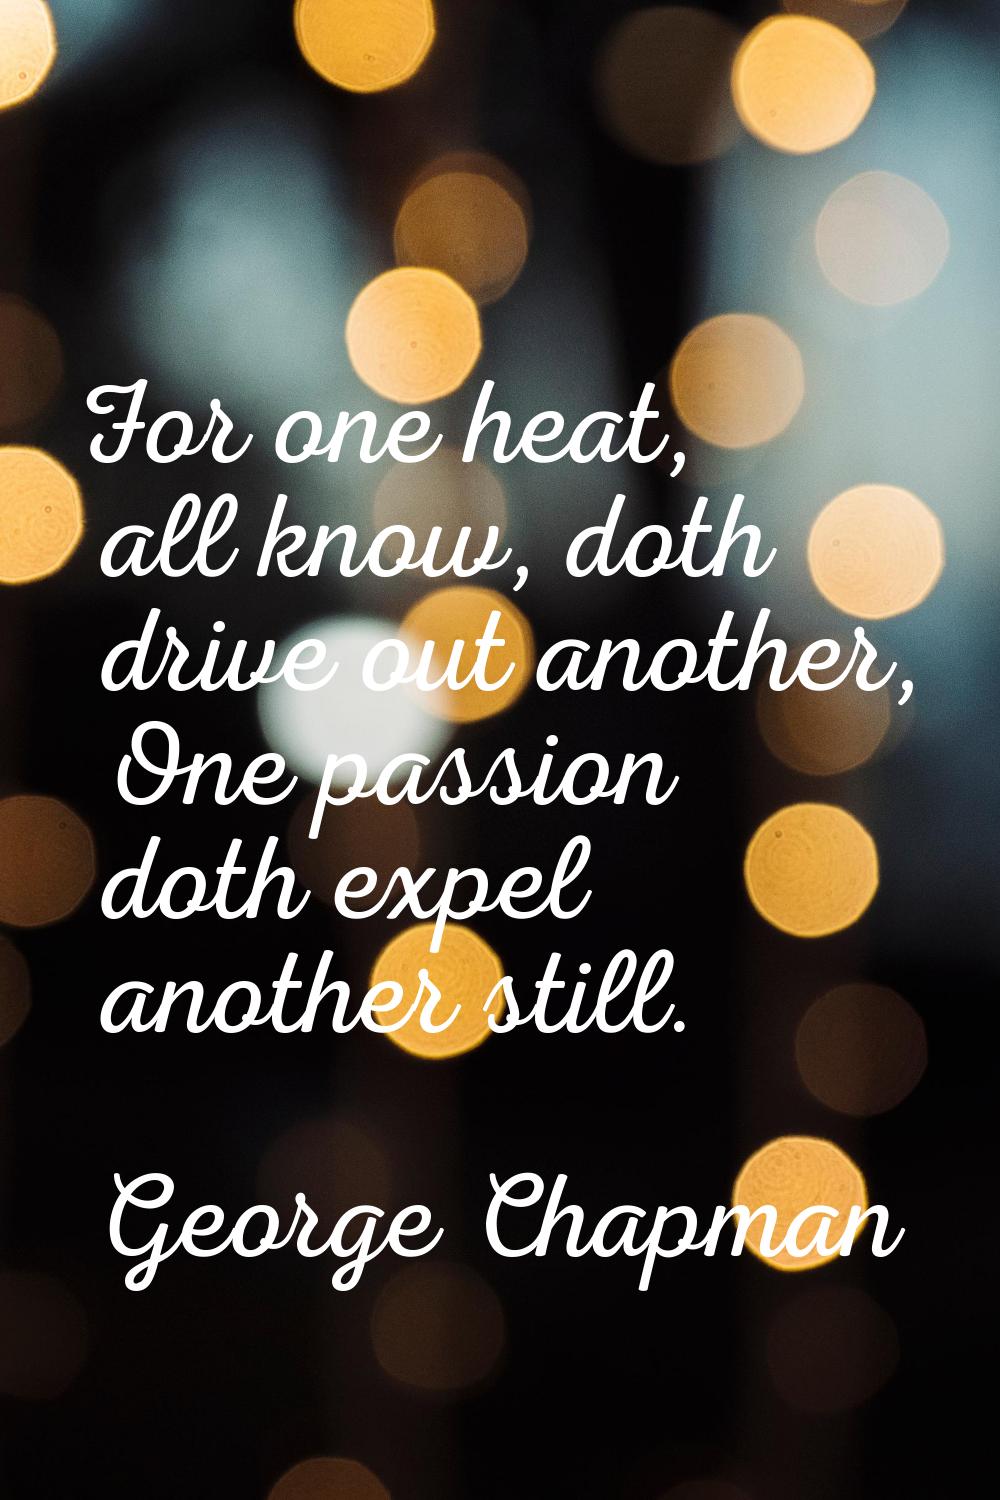 For one heat, all know, doth drive out another, One passion doth expel another still.